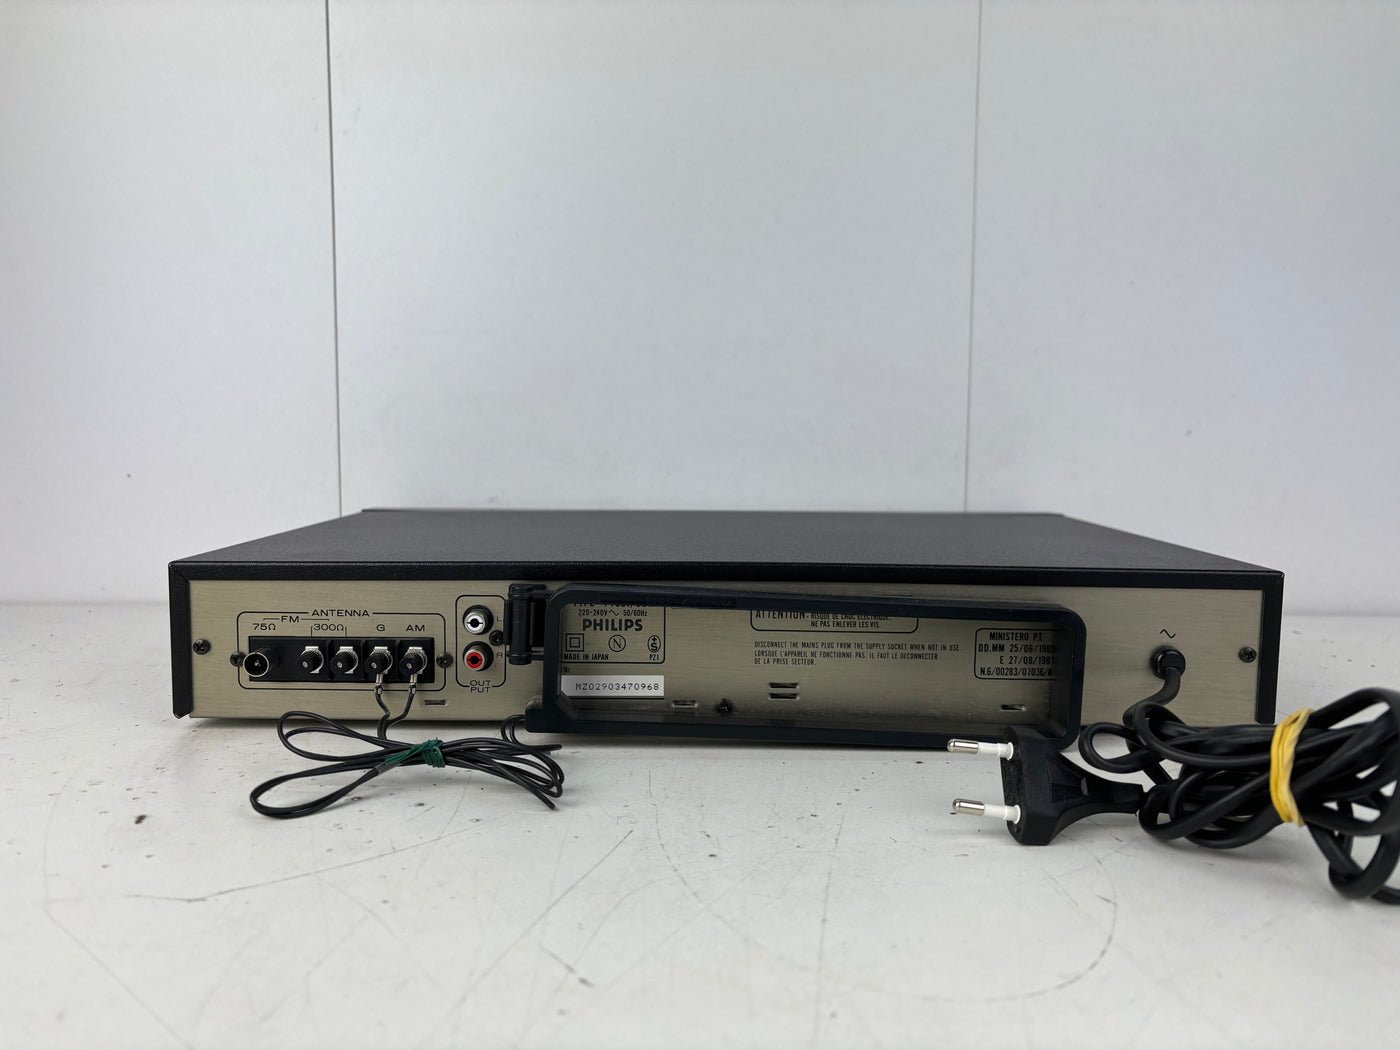 Philips FT-561 FM/AM Stereo Tuner